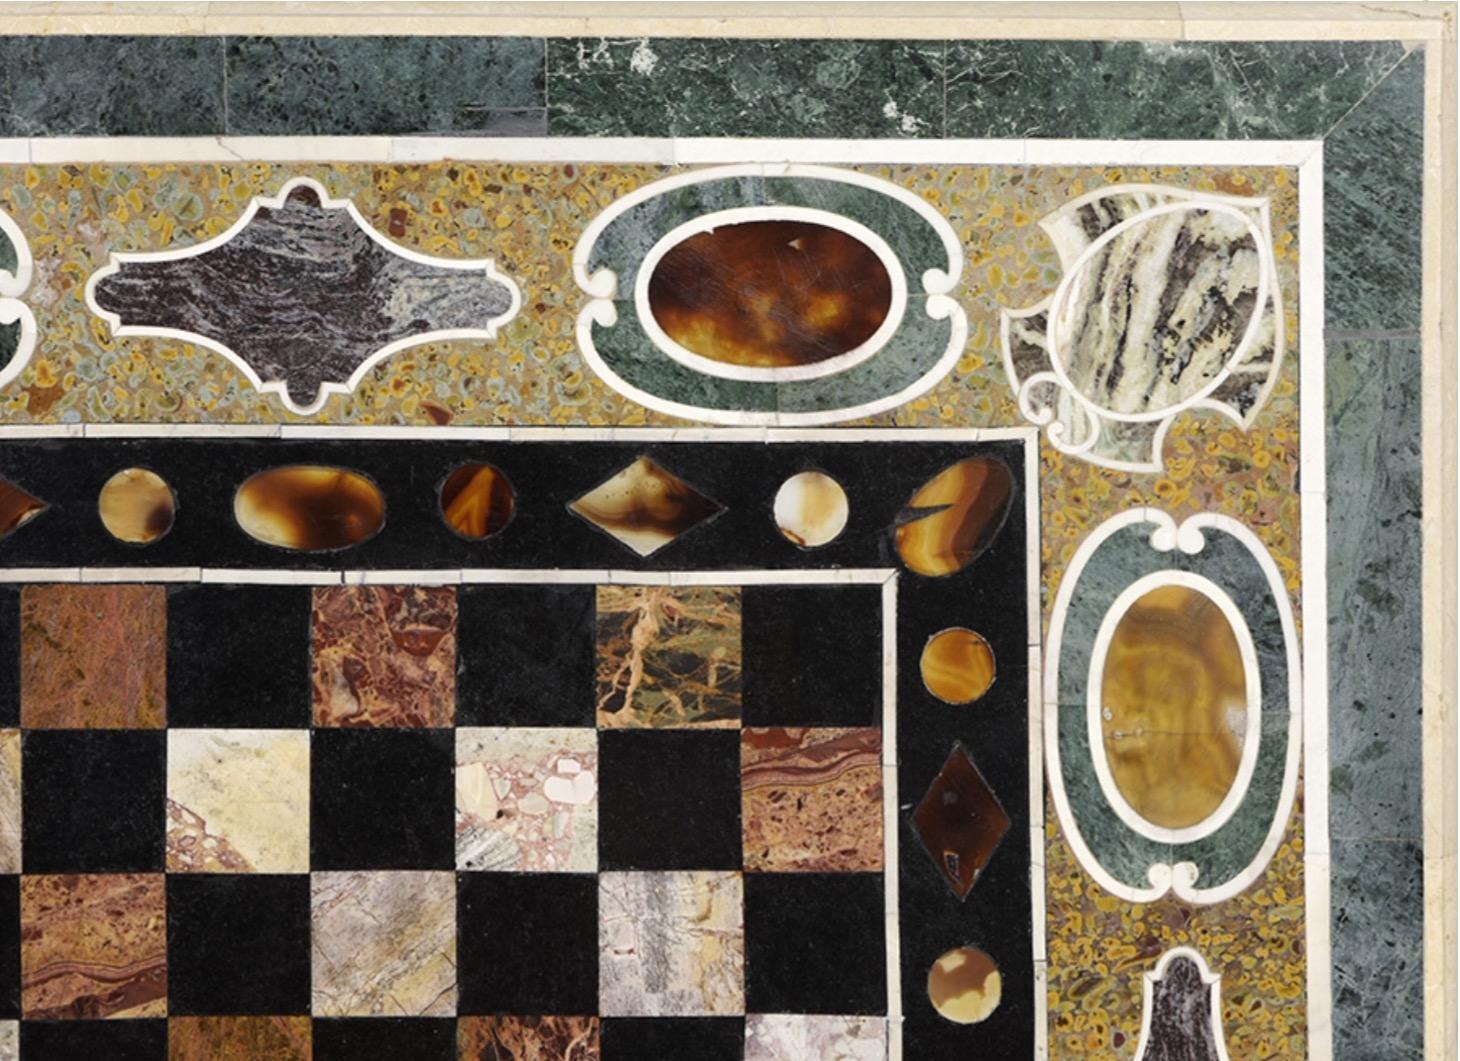 An outer band of framed oval agates interspersed with shields in the corners and rhomboidal forms highlights the central area, which has a chessboard in different colored stones and other blacks, an area that has been highlighted by a band of simple